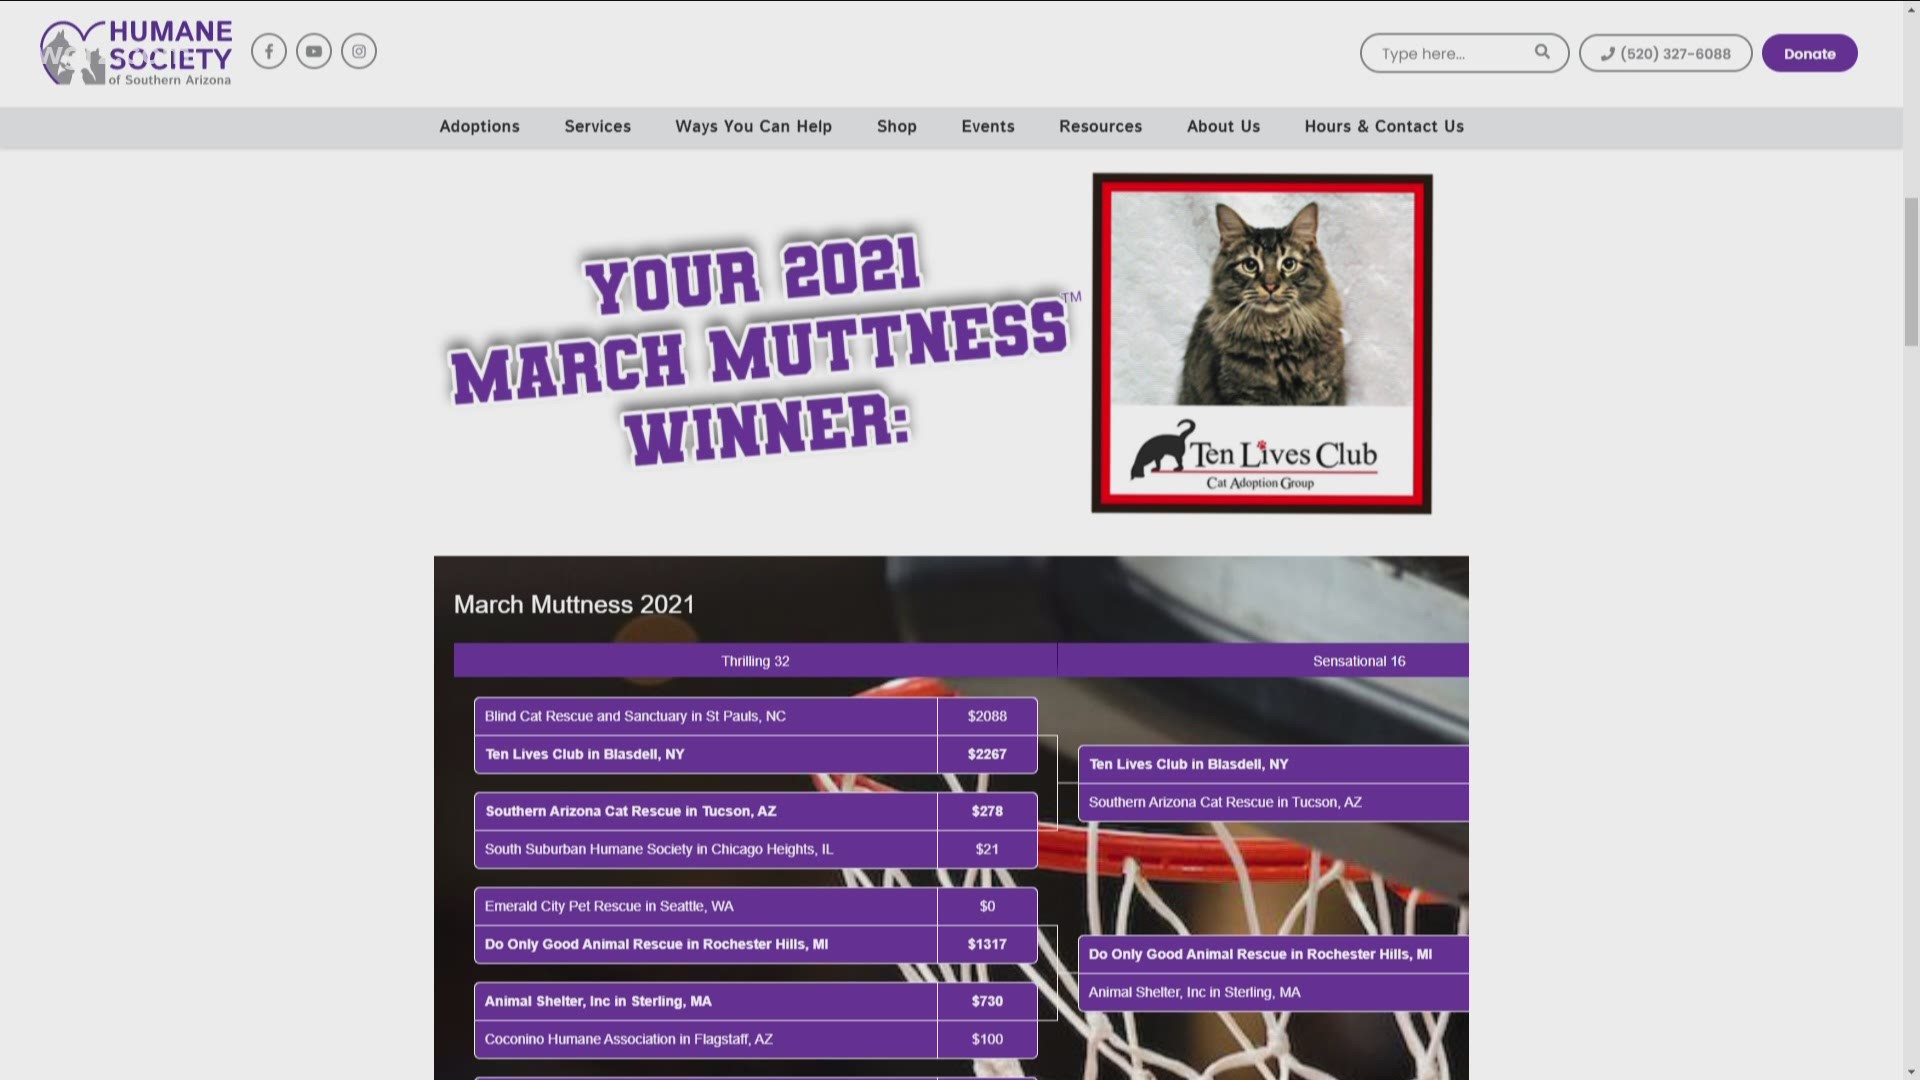 Ten Lives Club wins 'March Muttness' competition